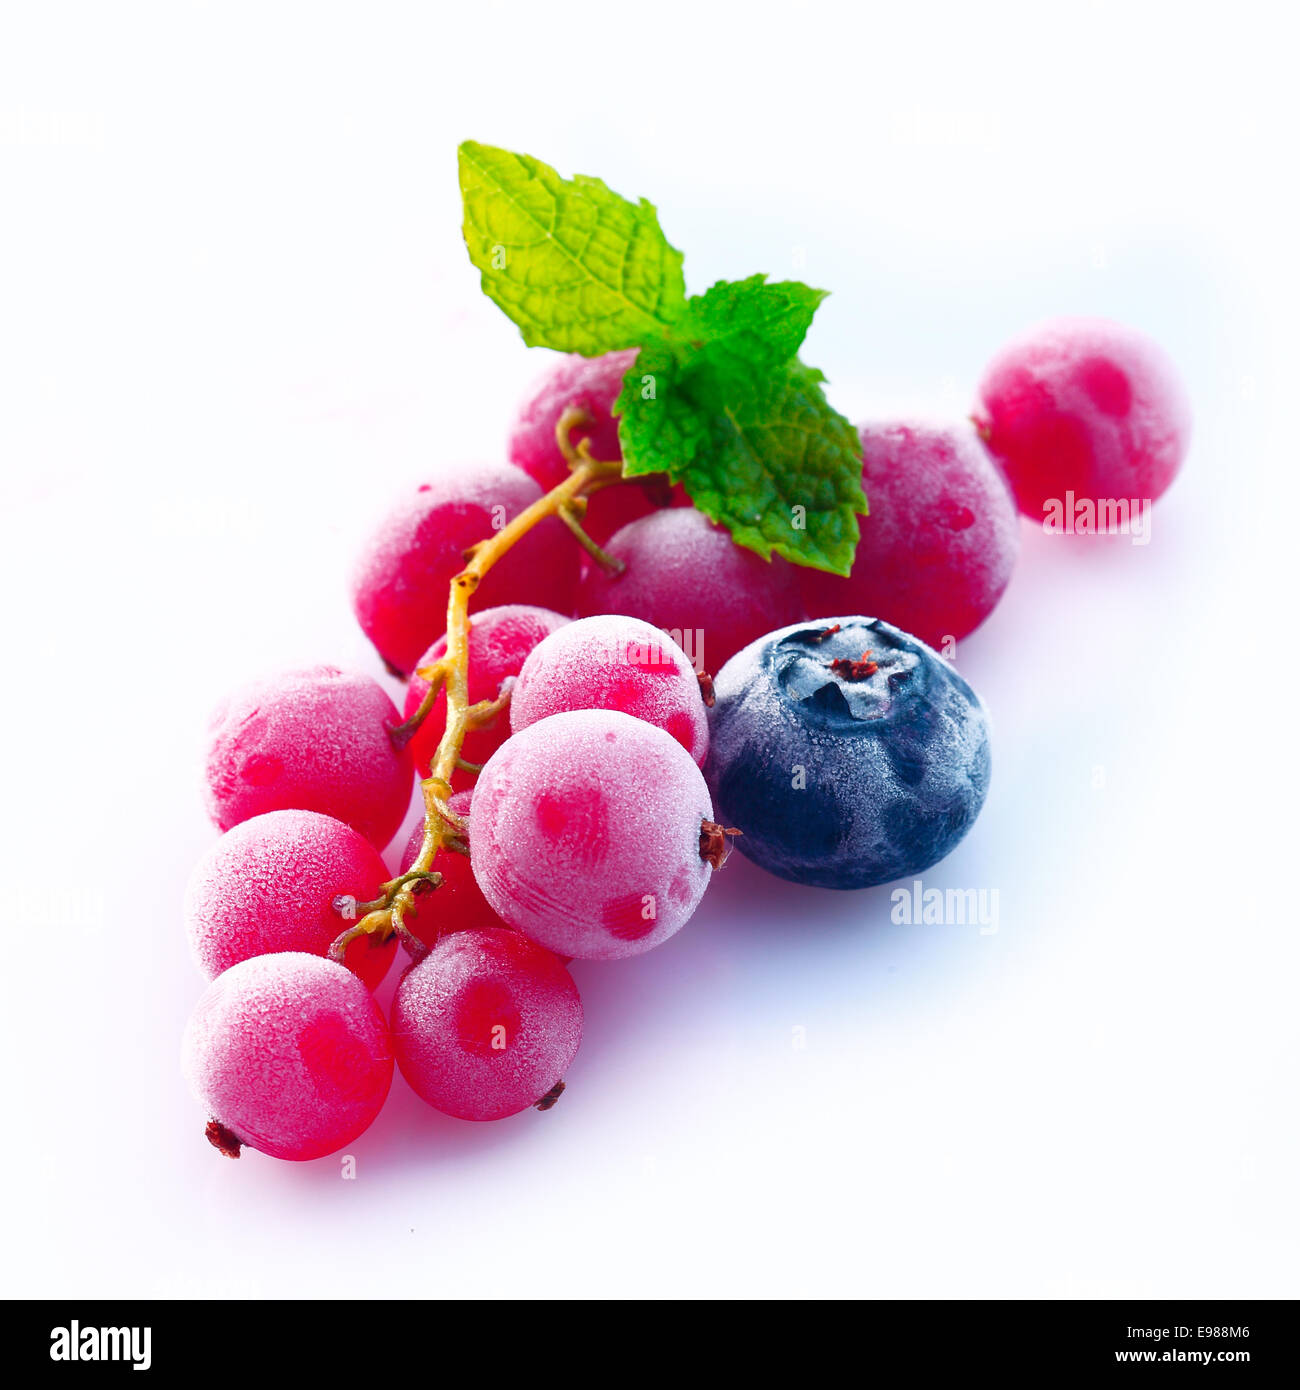 Assortment of chilled redcurrant, blueberry and raspberry berries with skins frosted with moisture Stock Photo